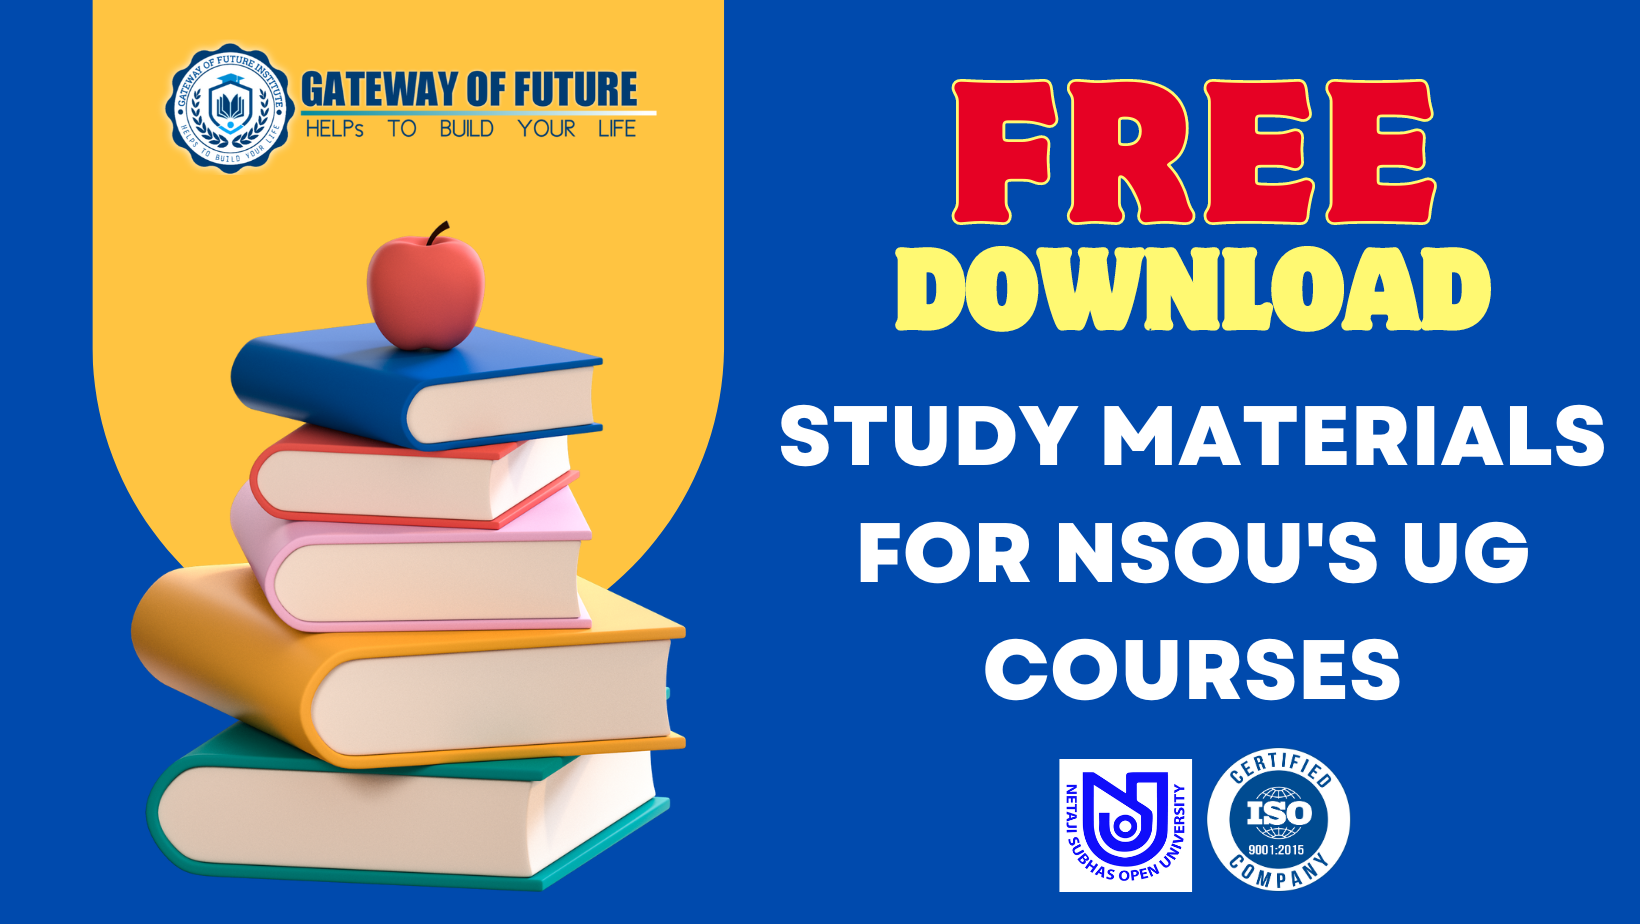 Free Download Study Materials for NSOU's UG Courses